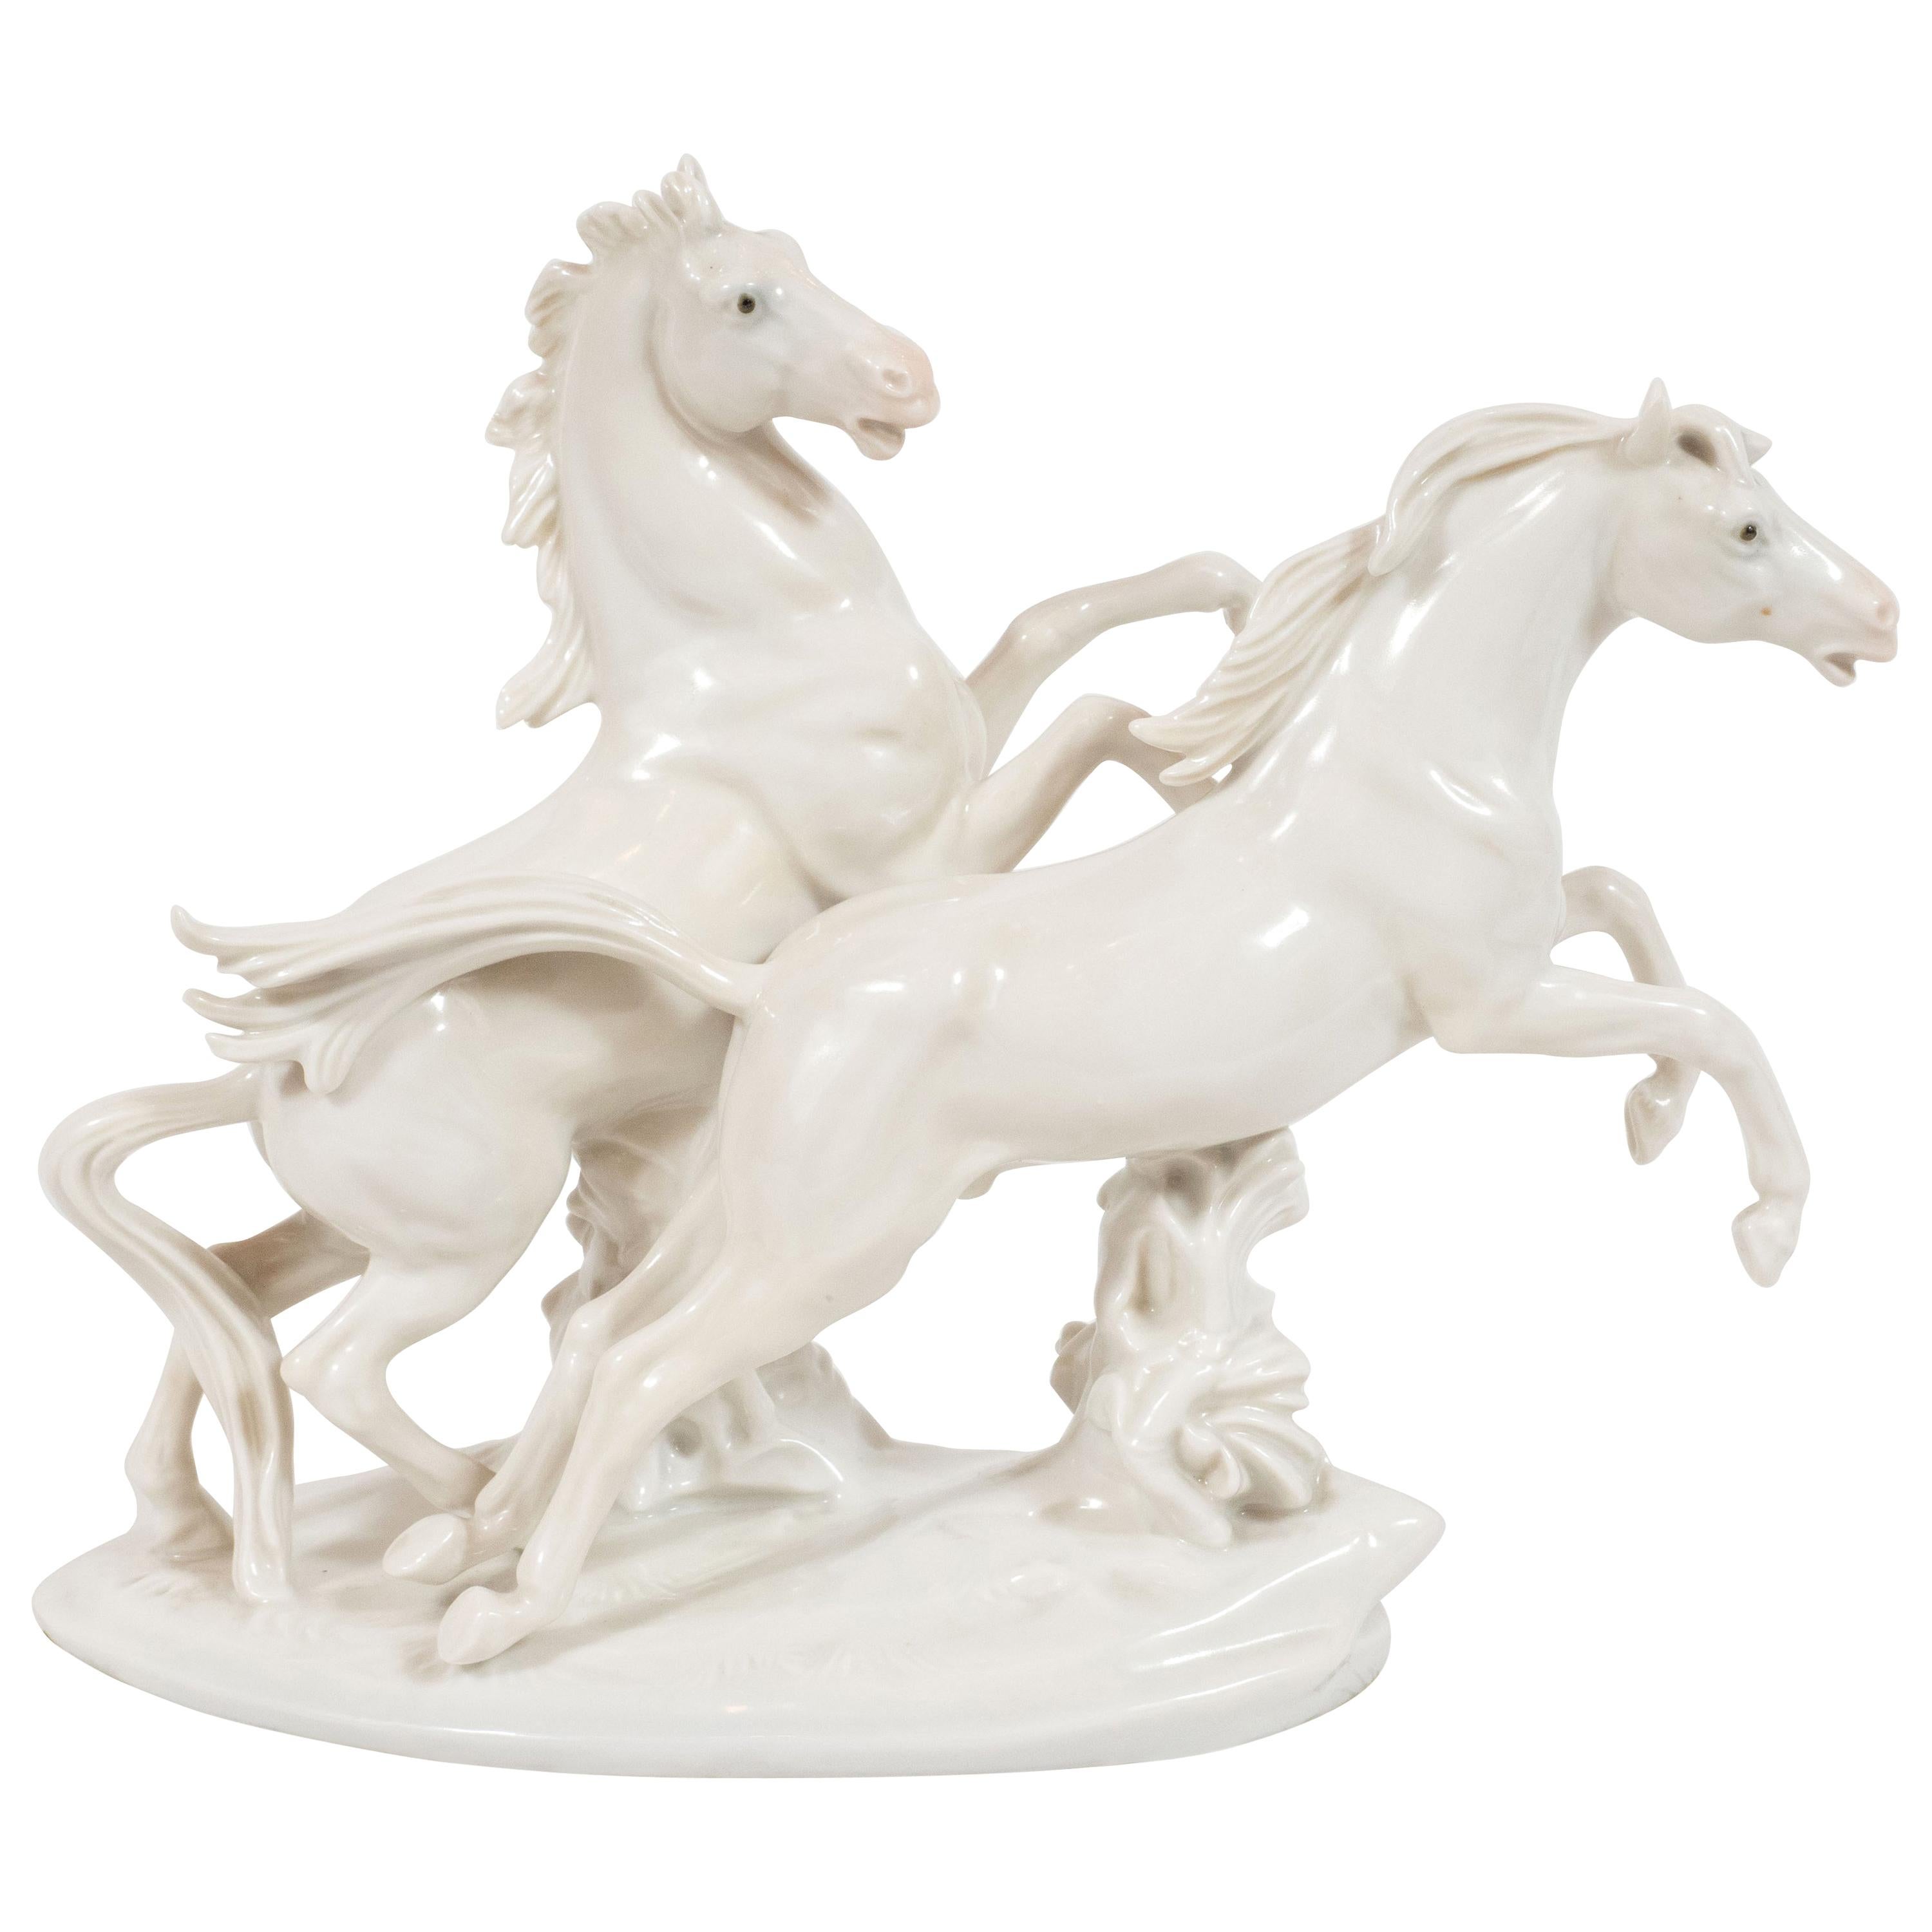 Art Deco White Porcelain Galloping Horse Sculptures Signed by Karl Ens